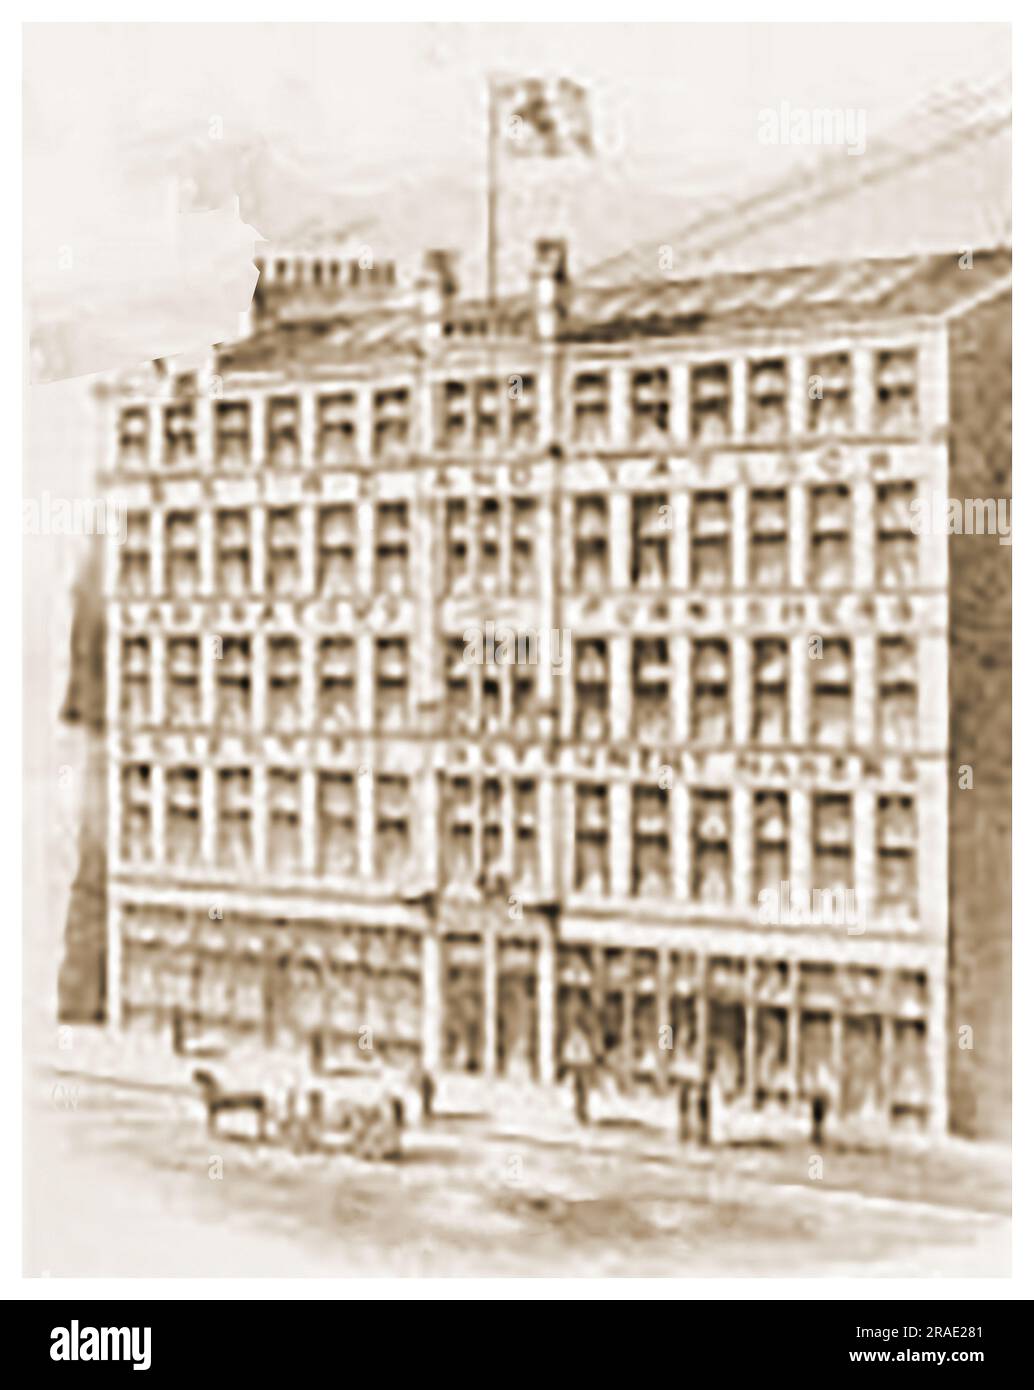 The warehouse & factory of Baird & Tatlock, scientific instrument manufacturers 45 Renfrew street. Glasgow in 1907.. Scotsman Hugh Harper Baird set up the business in Glasgow in 1881, moving to Hatton Garden, London, in 1890, opening a laboratory equipment workshop there. Stock Photo